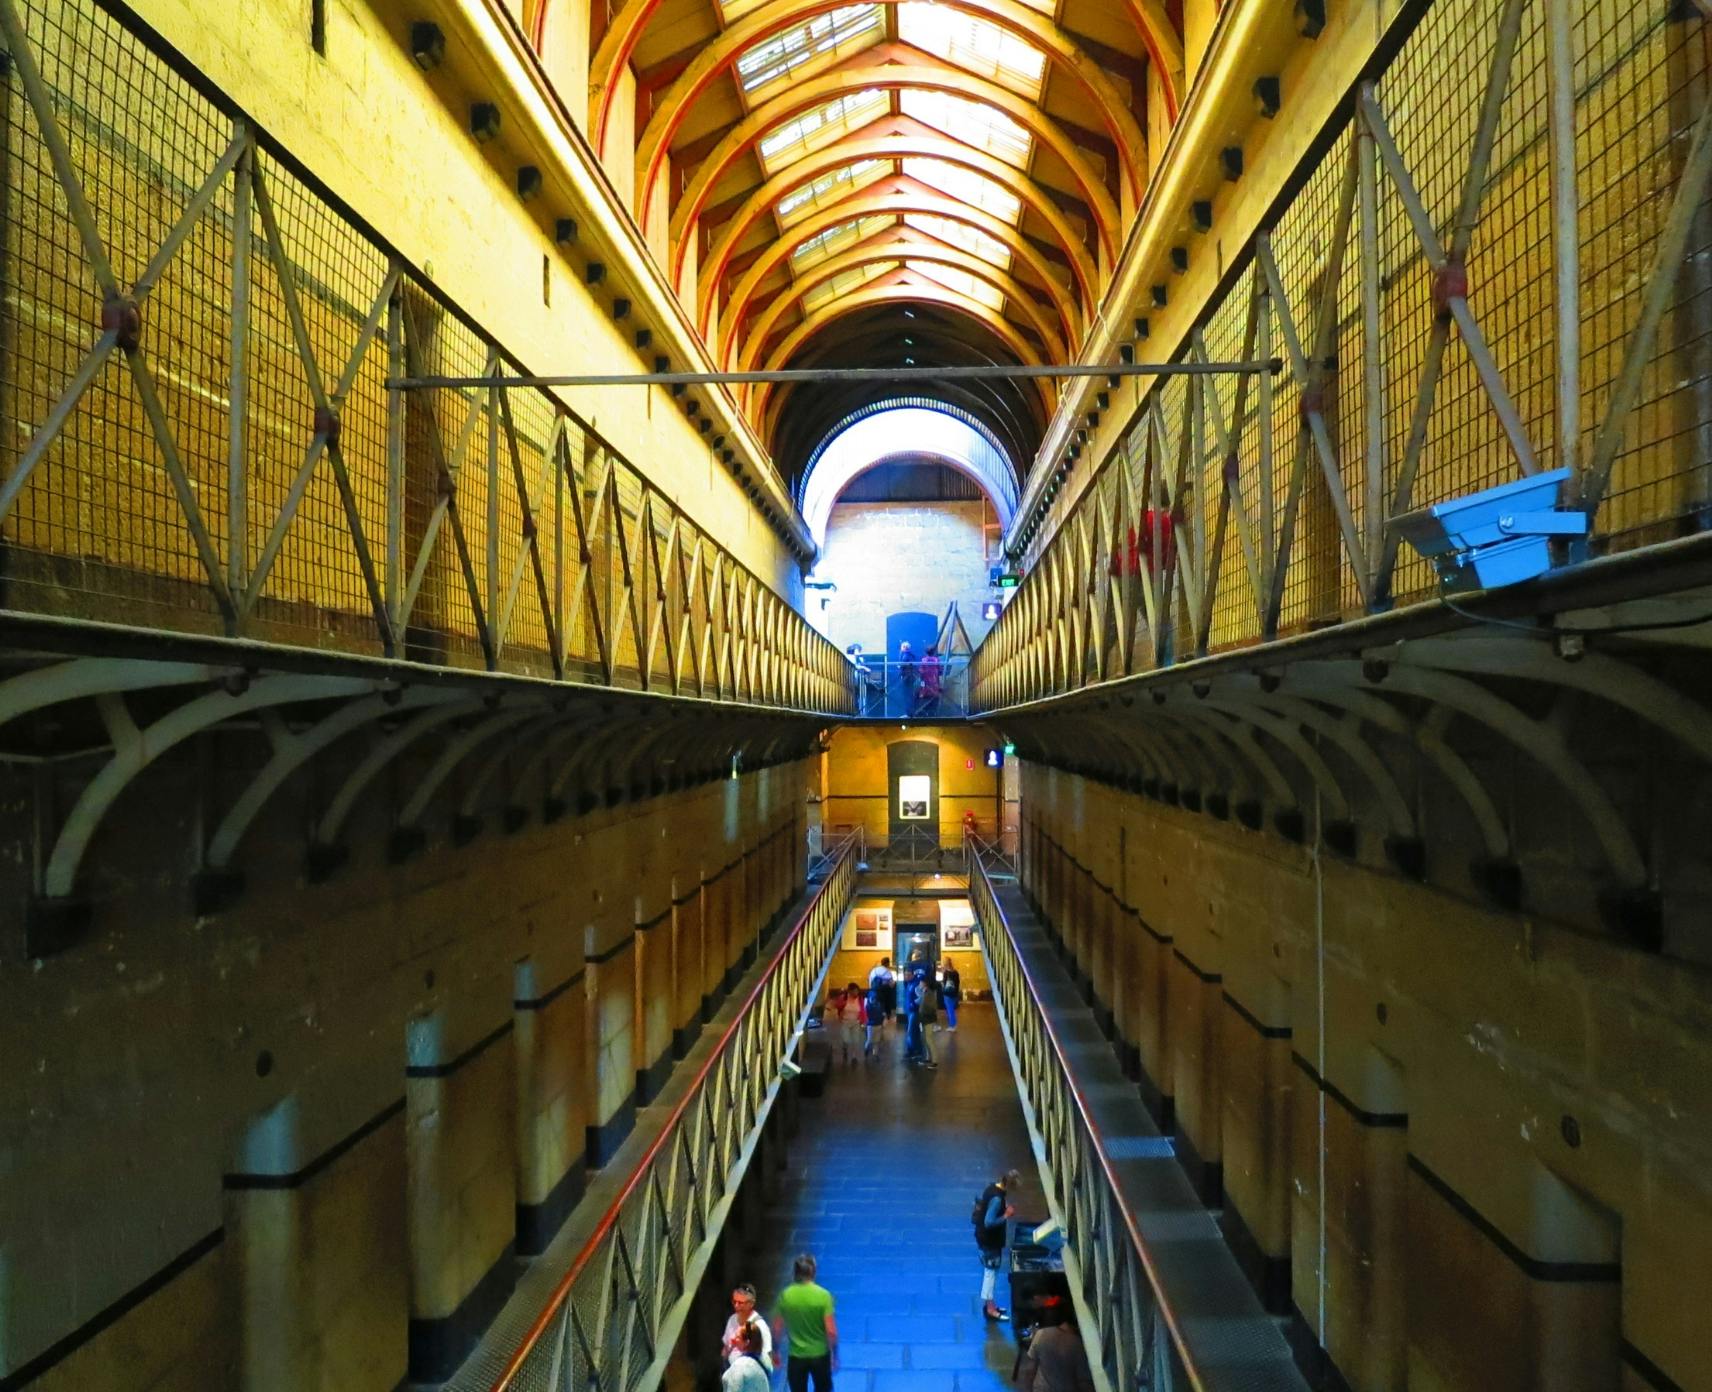 Two levels of prison cells in Old Melbourne Gaol